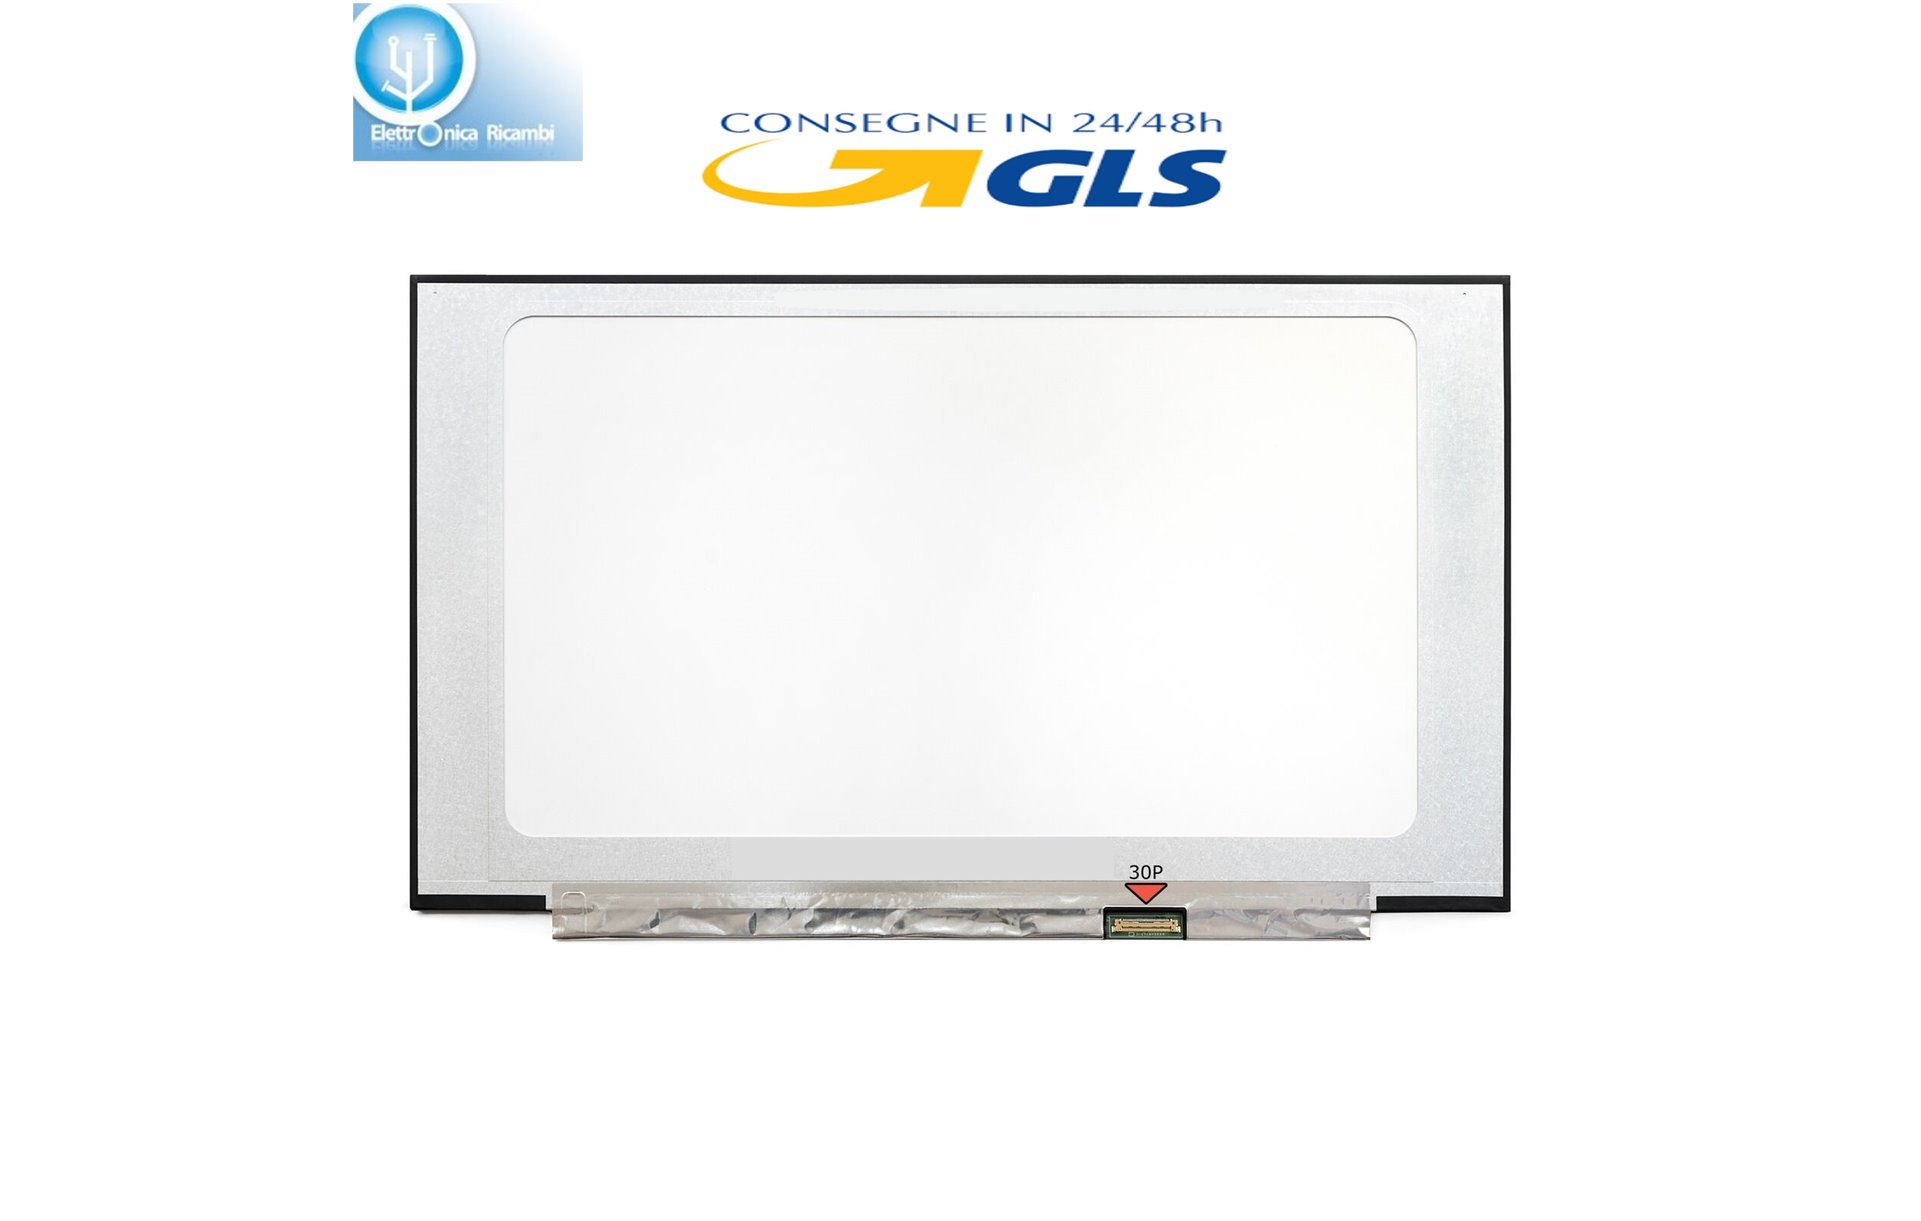 Display CyberPower TRACER III 15V VR 300 LCD 15,6 LED Slim 1920x1080 30-pin Fh IPS